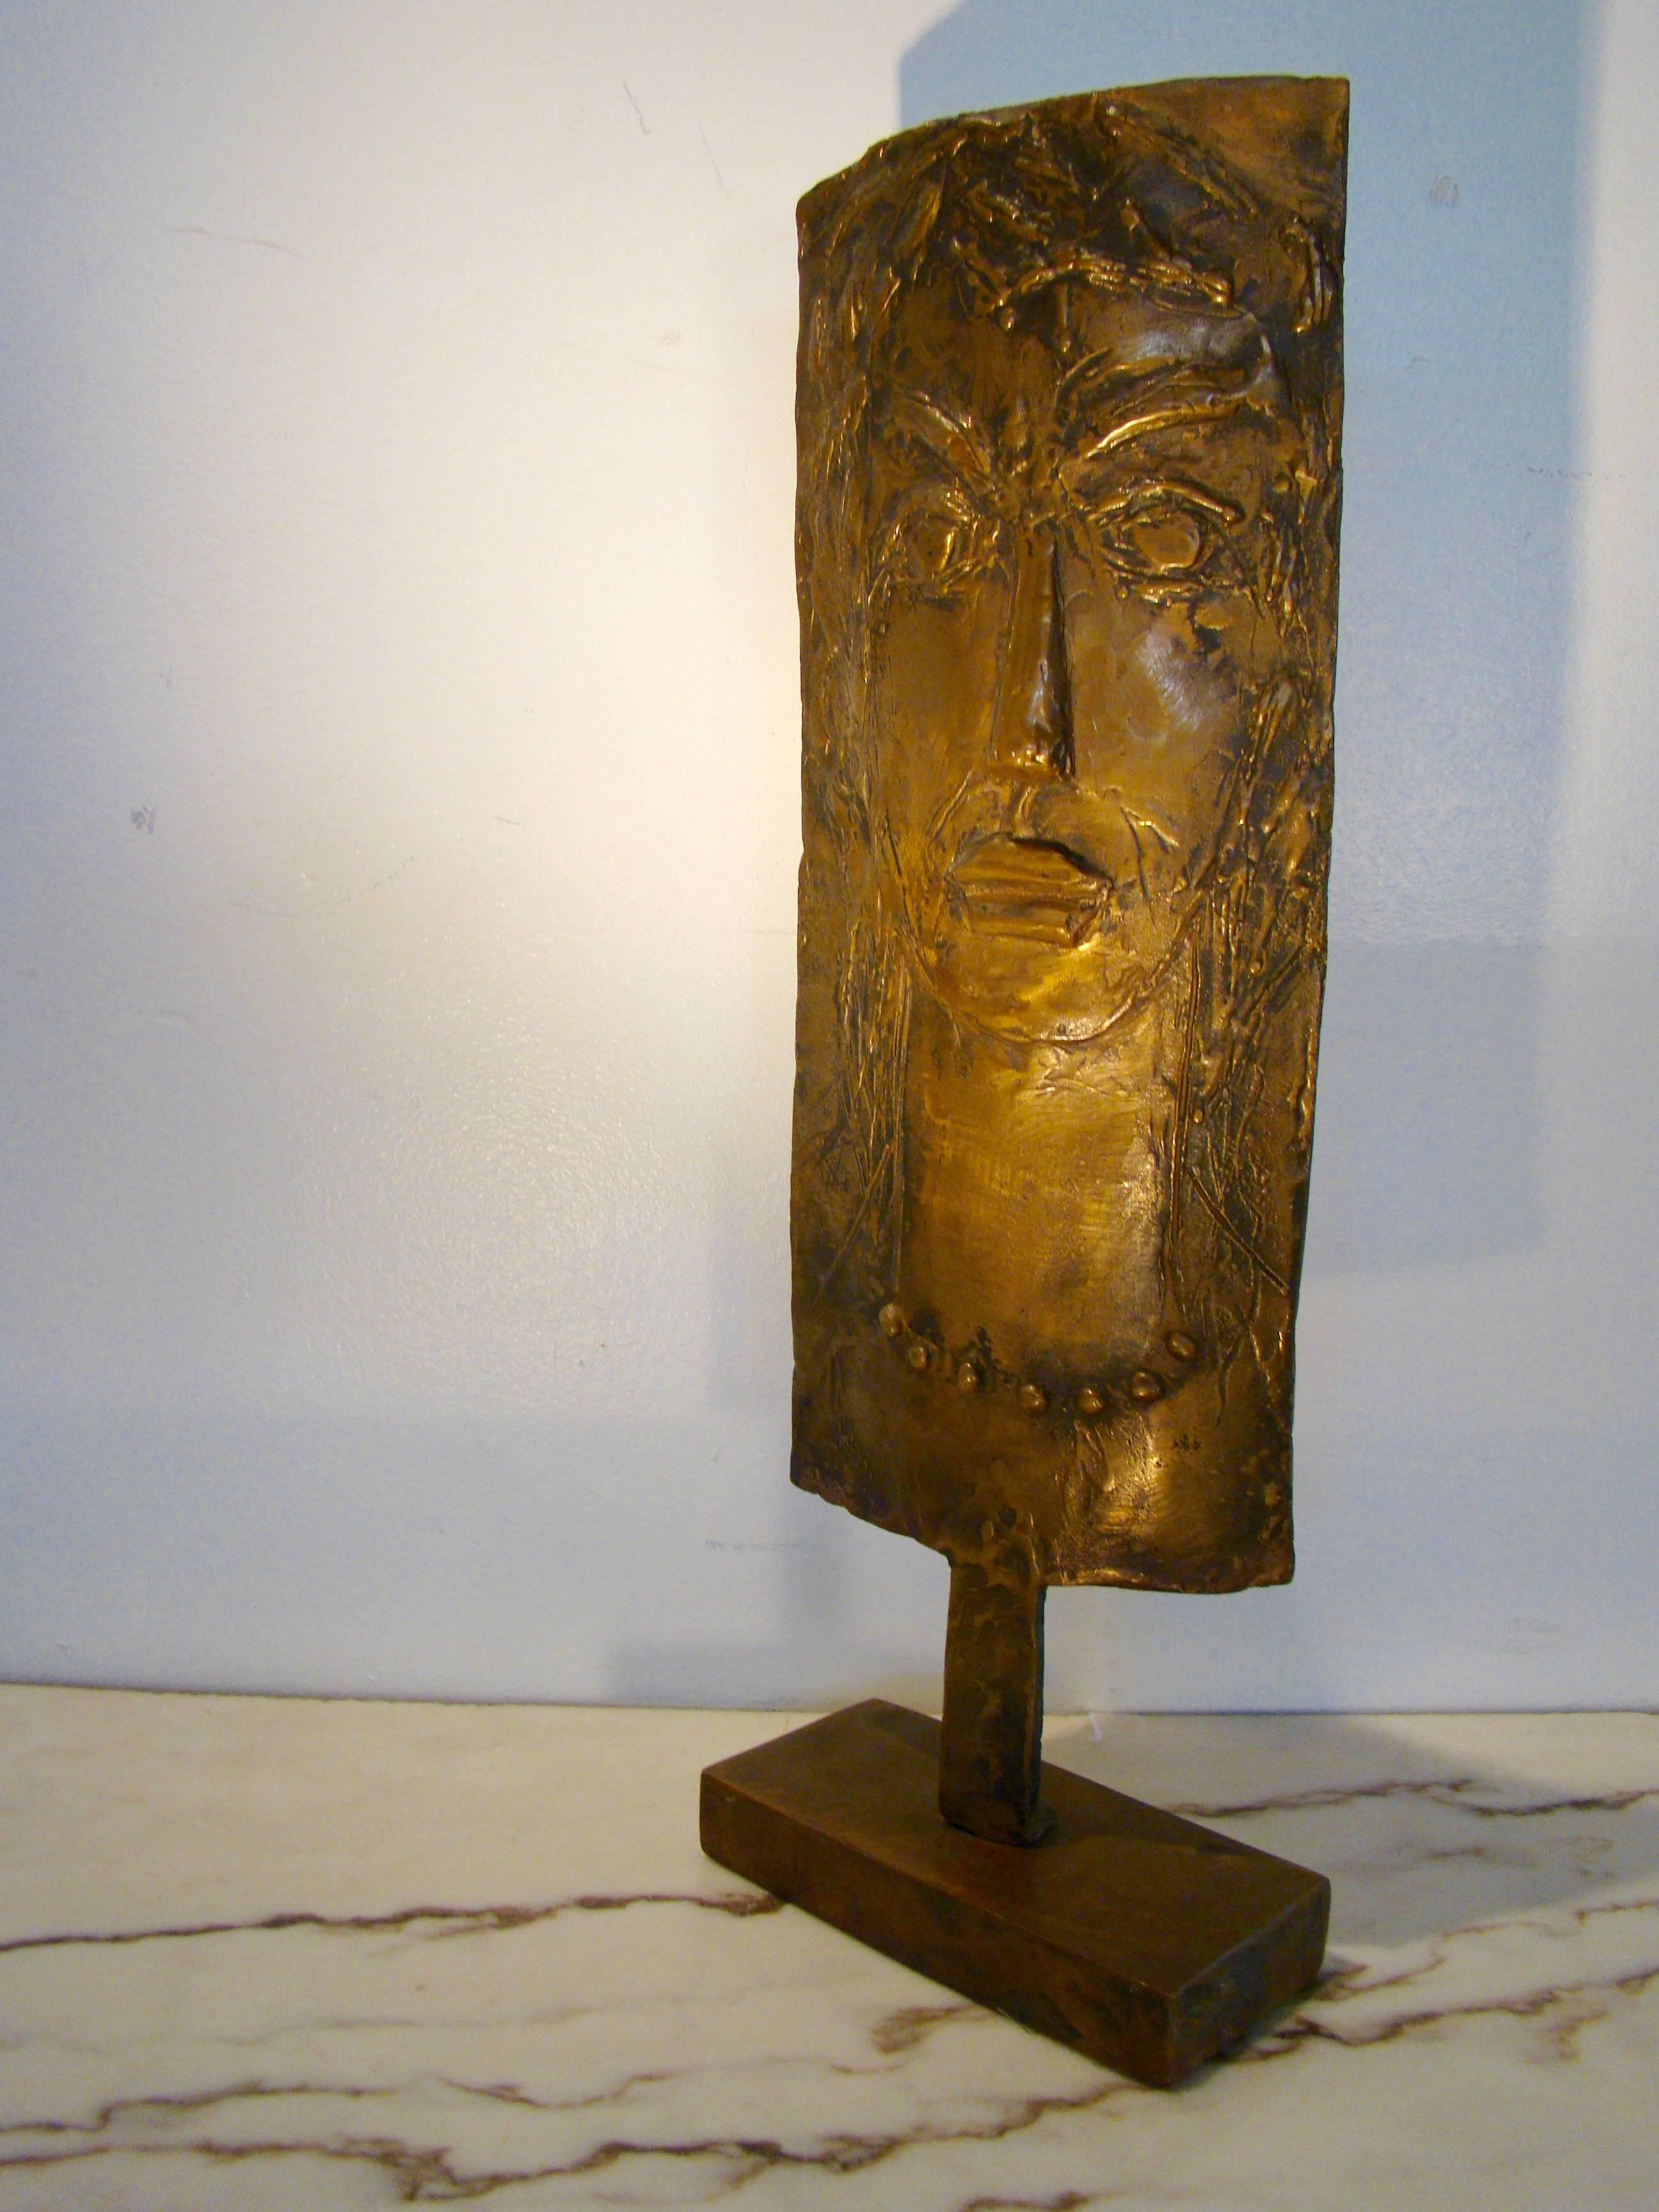 Bronze Torch Cut Table Sculpture by E. Katz In Excellent Condition For Sale In Denver, CO